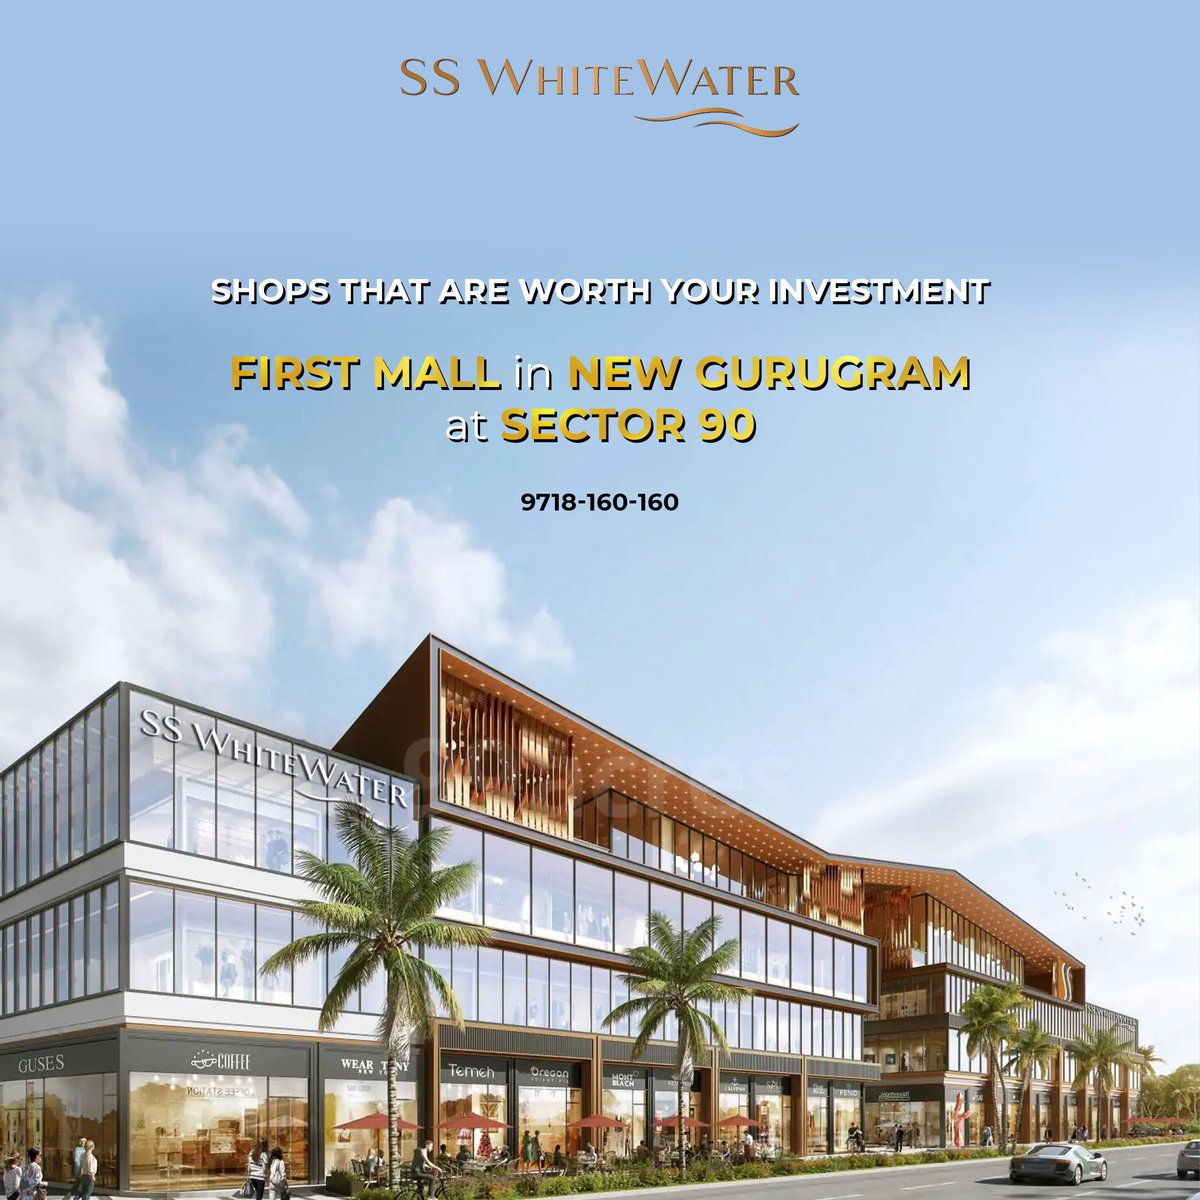 #SSWhitewater in Sector 90, #Gurgaon

#Shops That Are Worth Your #Investment

Know More: 9718160160 #AssetsGalleria

#propertyinvestment #realestateinvestment #investinshops #commercialproject #commercialinvestment #commercialproperty